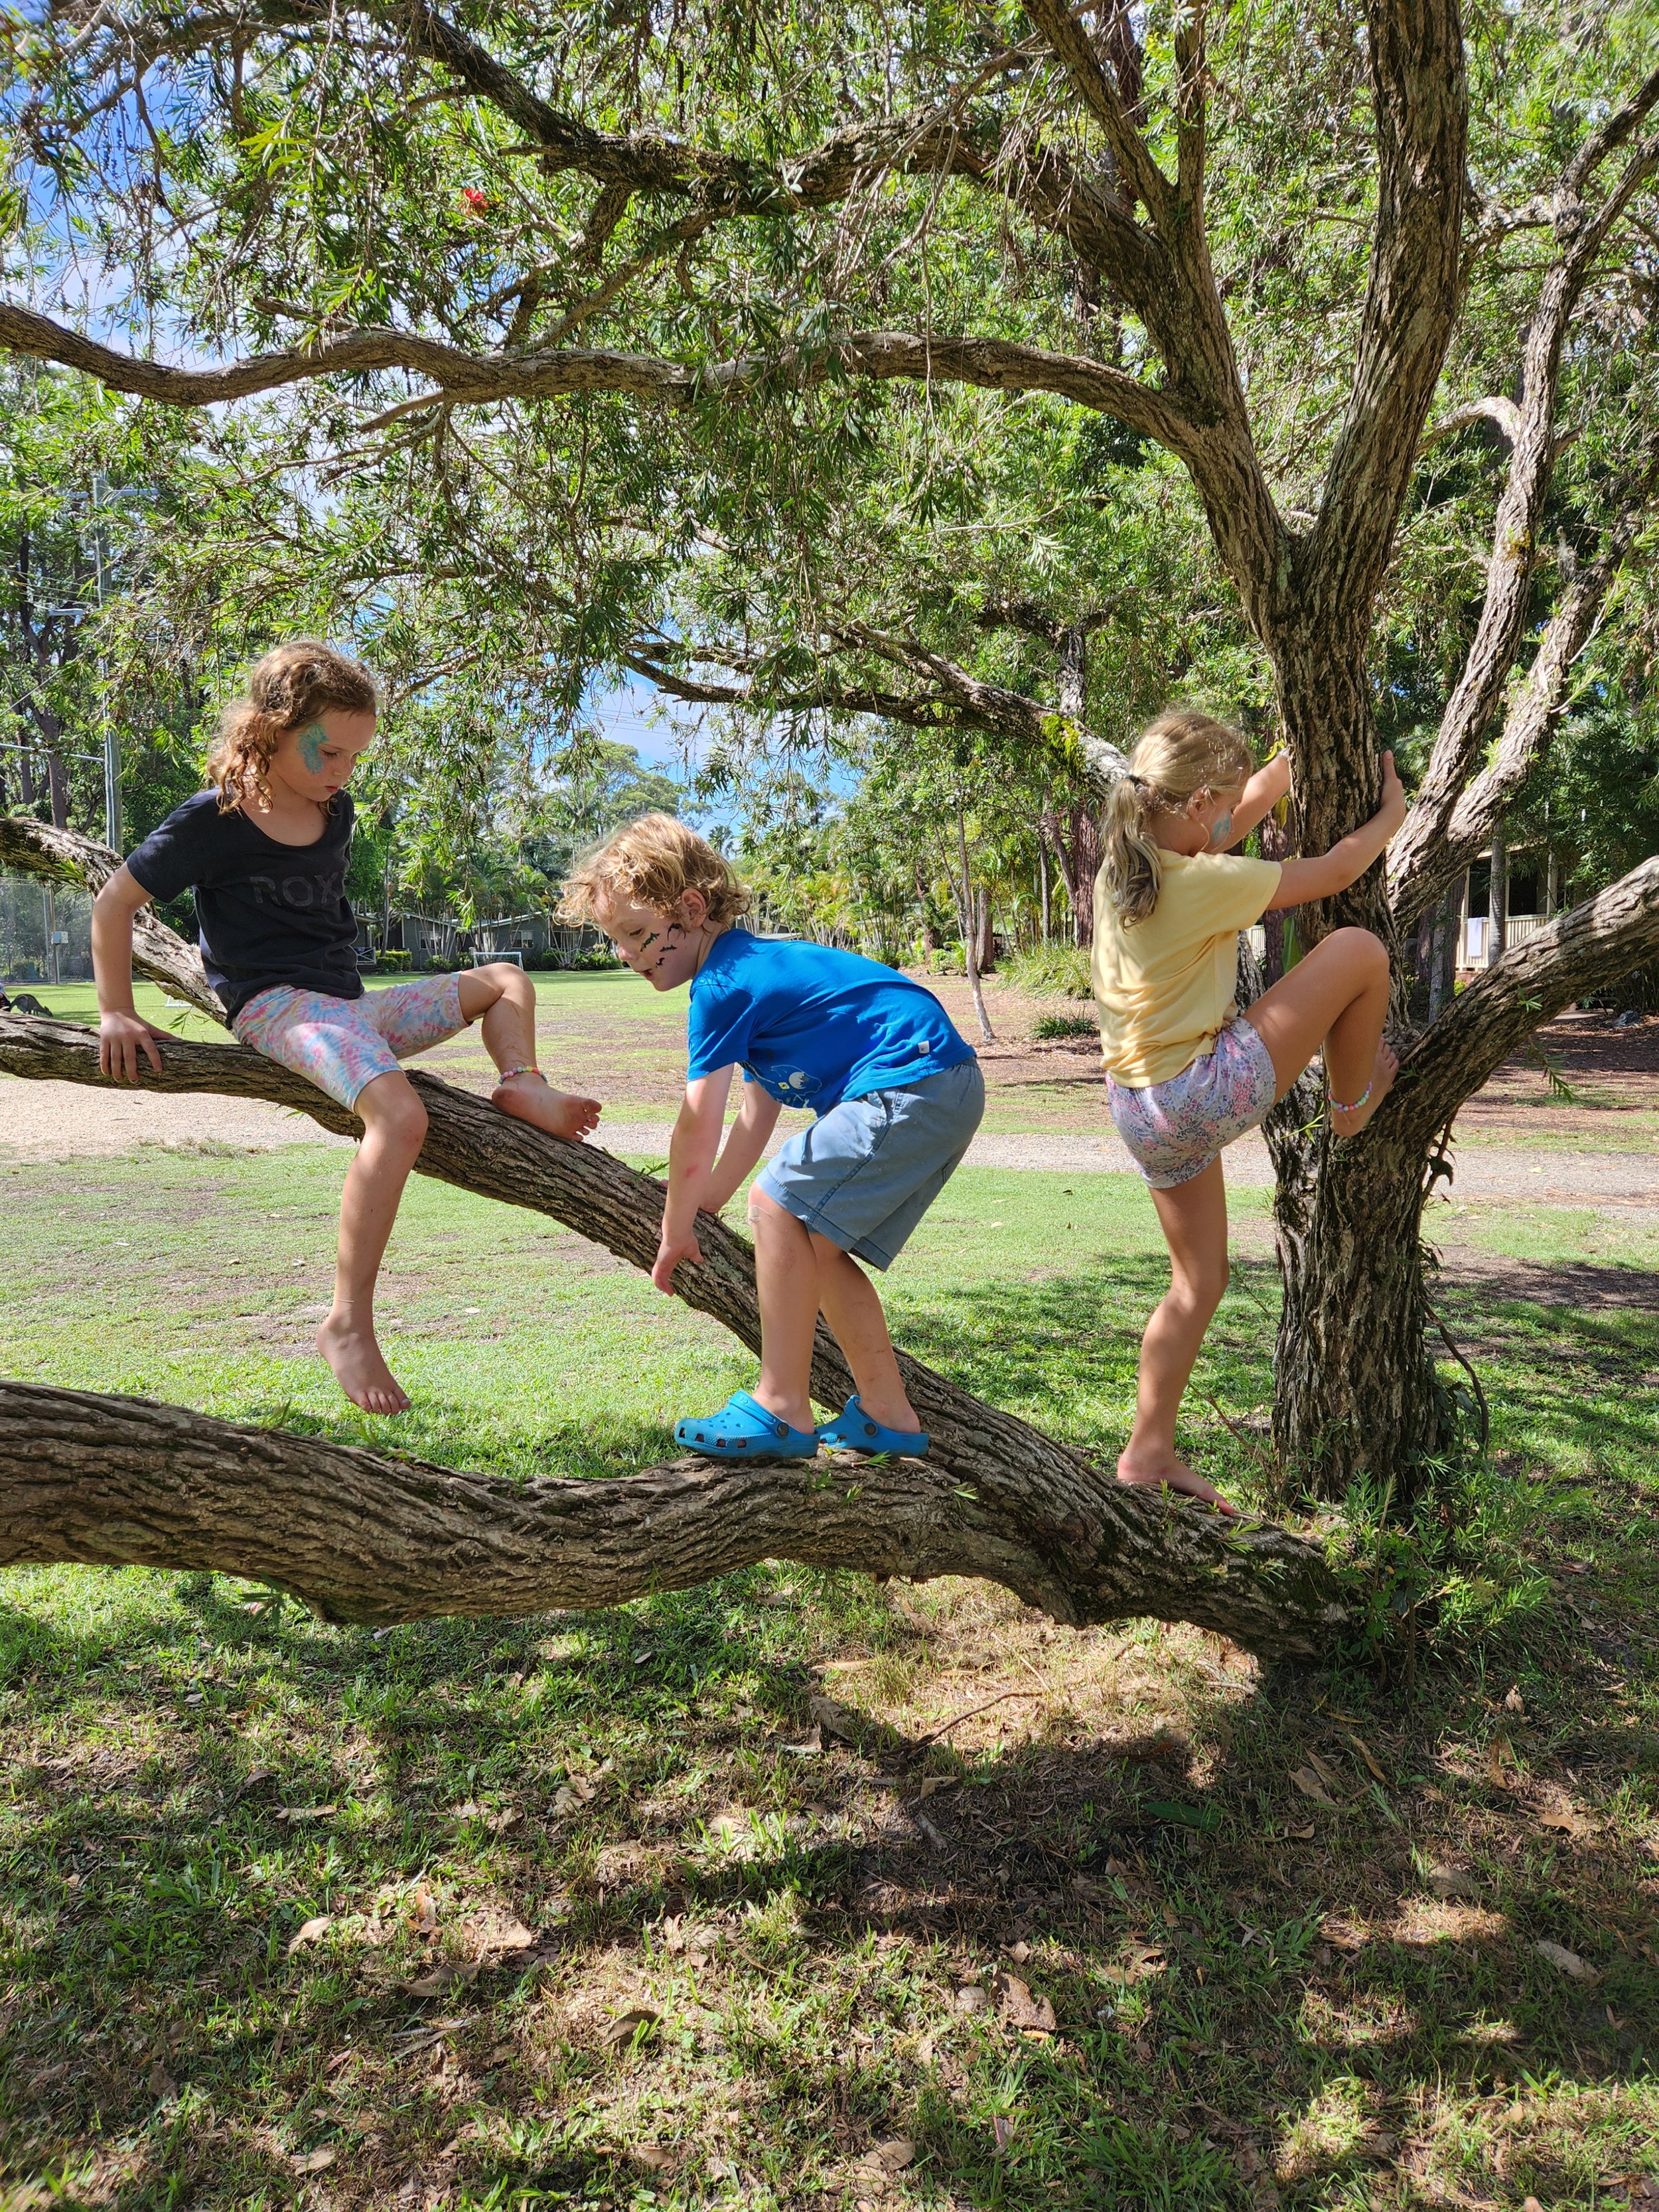 The beauty of camping - kids have time to do simple things like climbing trees